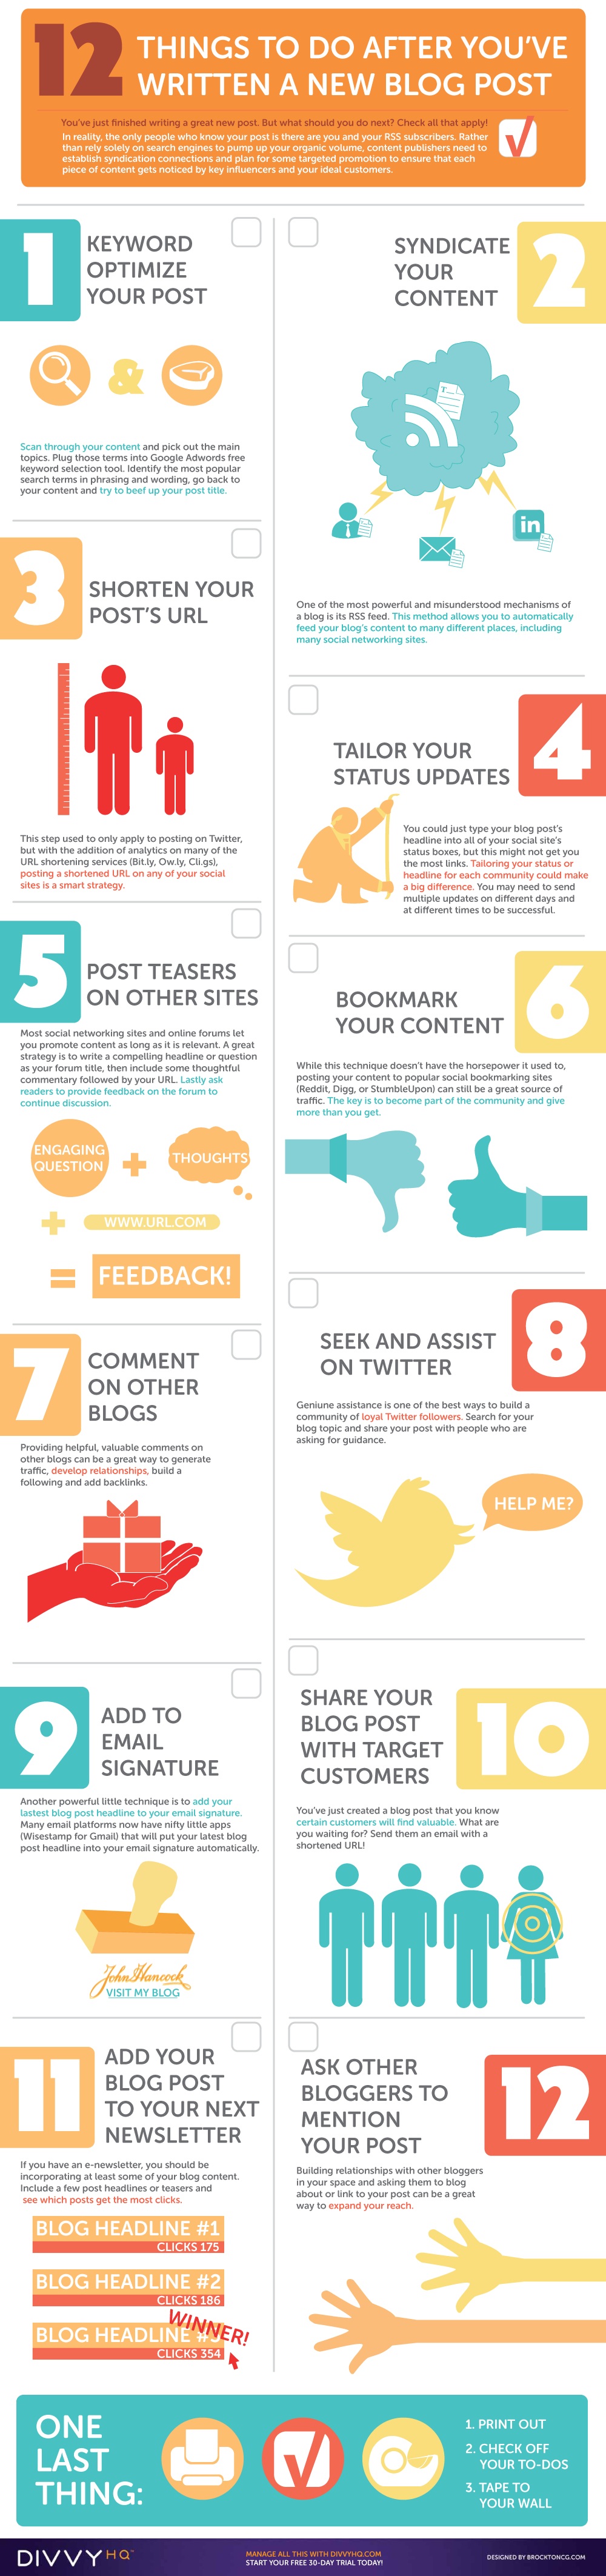 12 things to do after you've written a new blog post [Infographic]